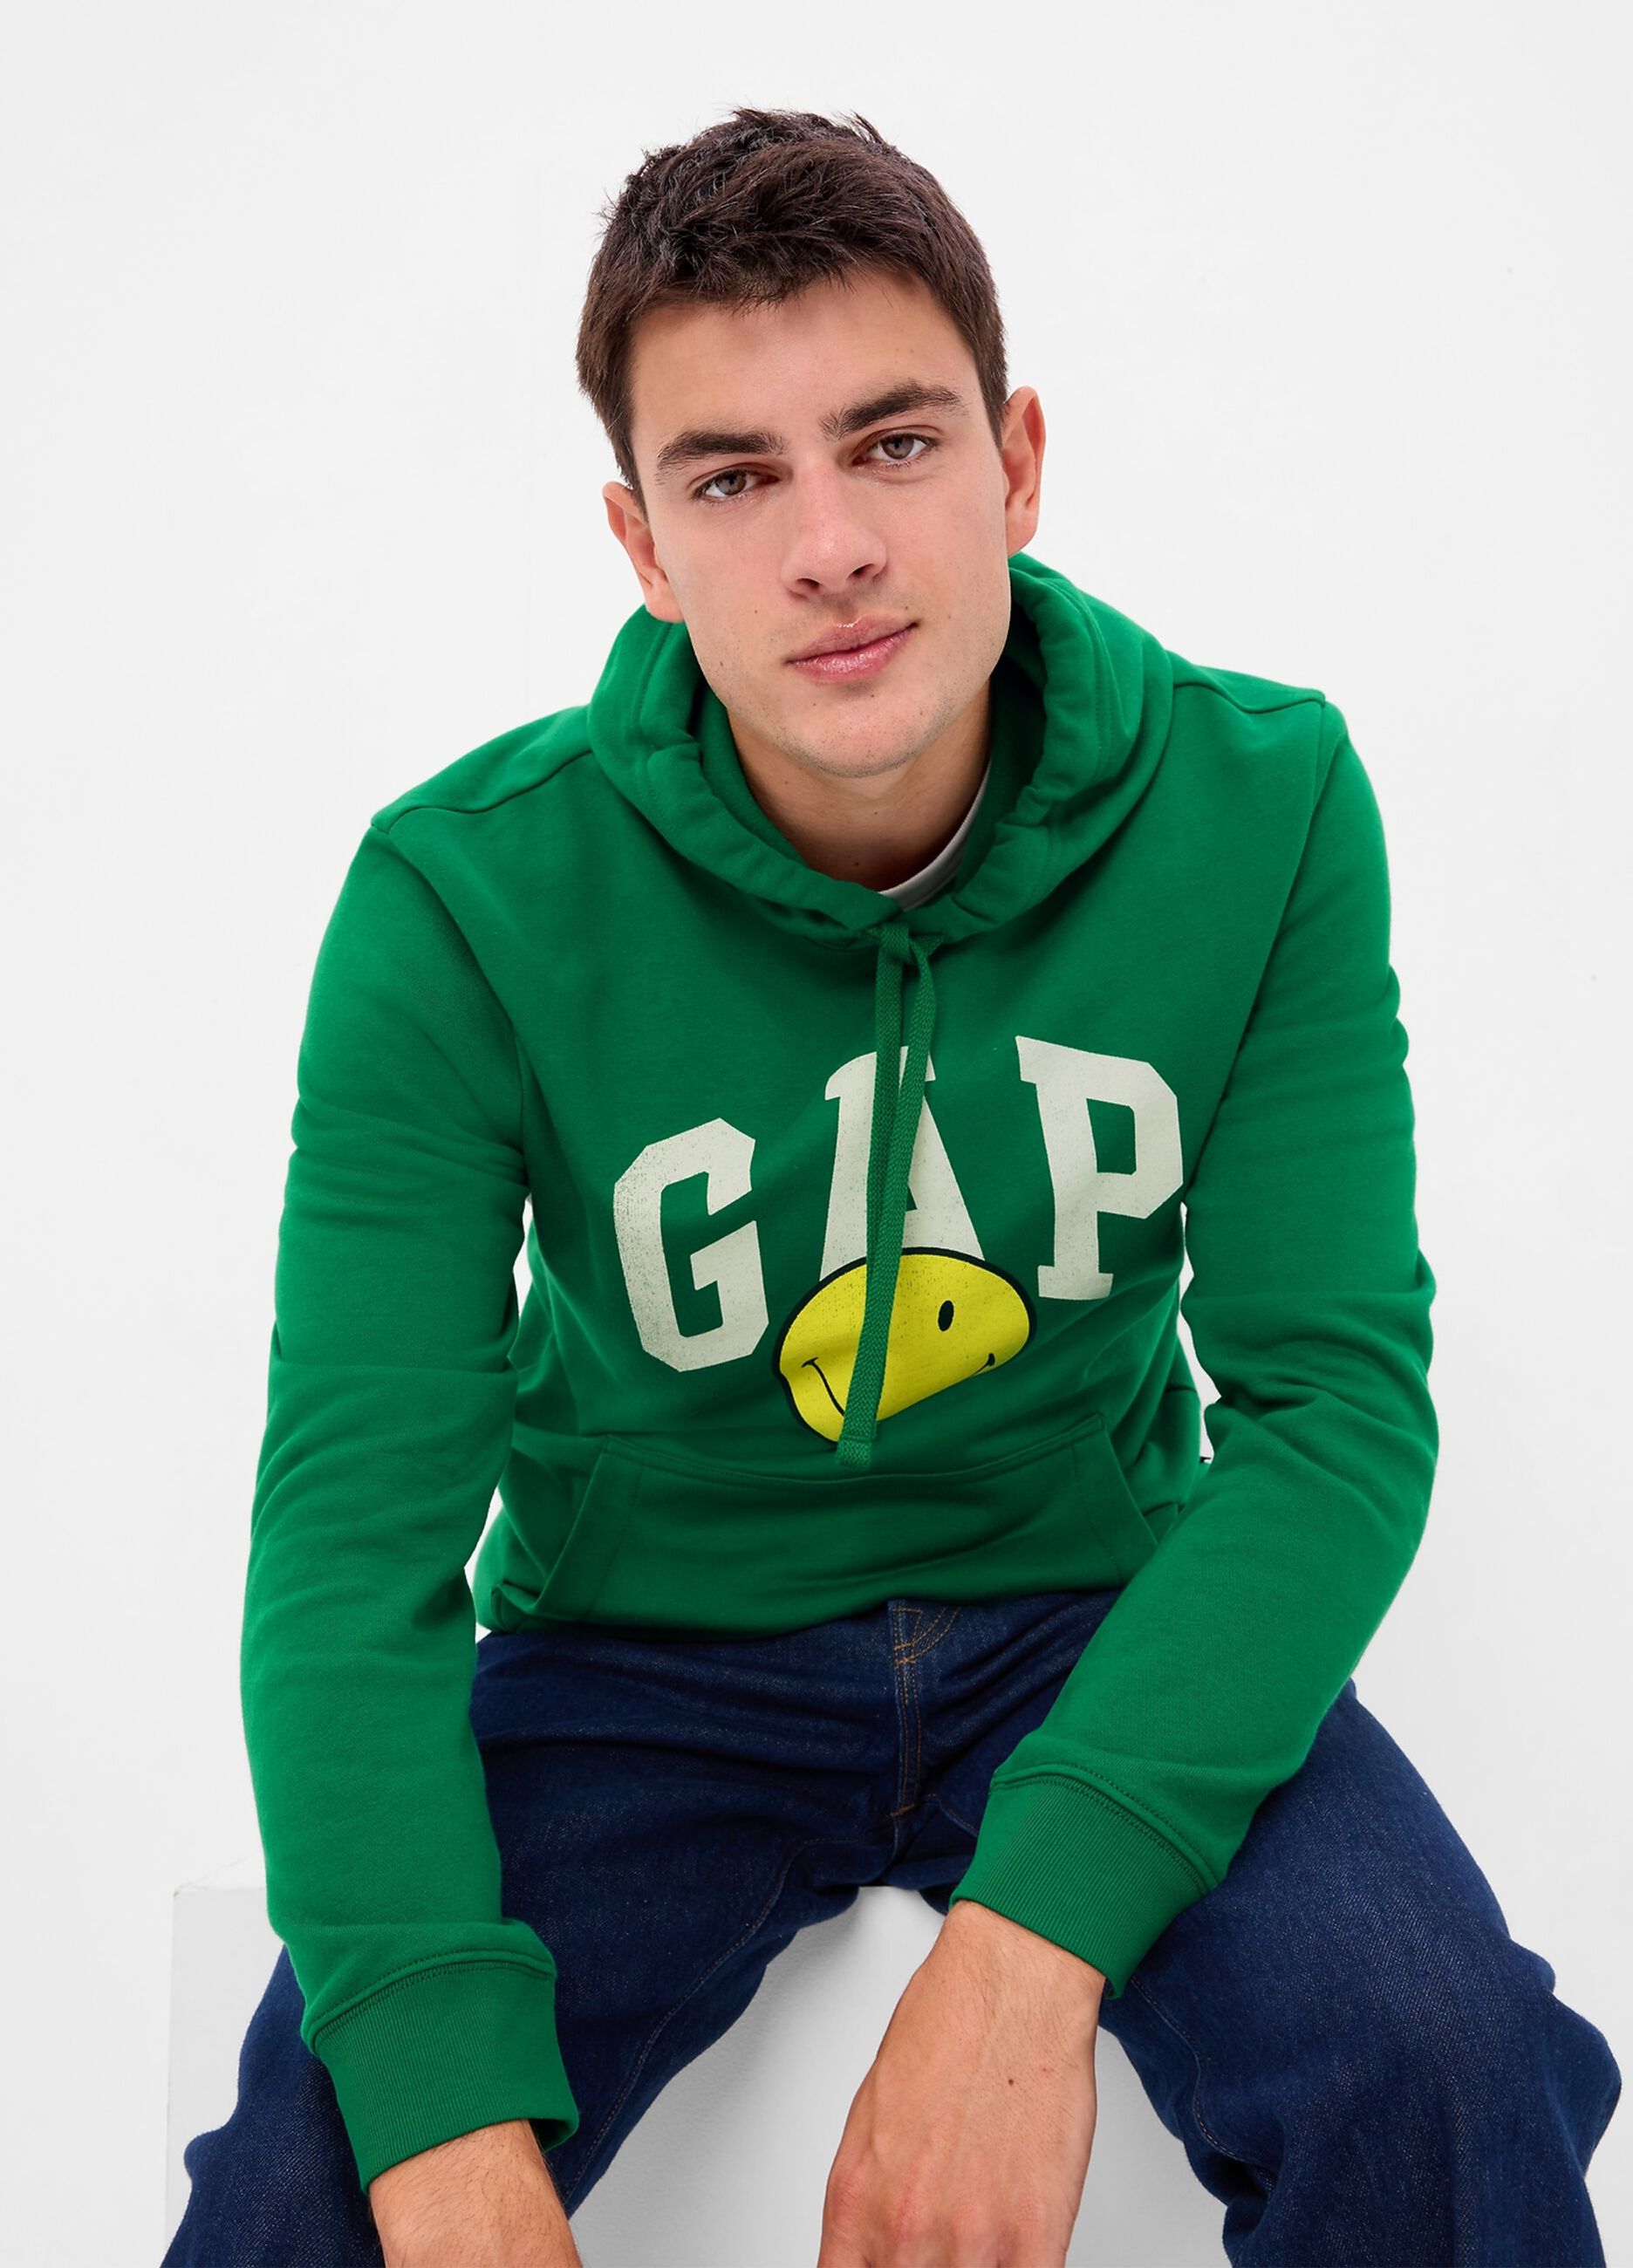 Hoodie with Smiley® print and logo